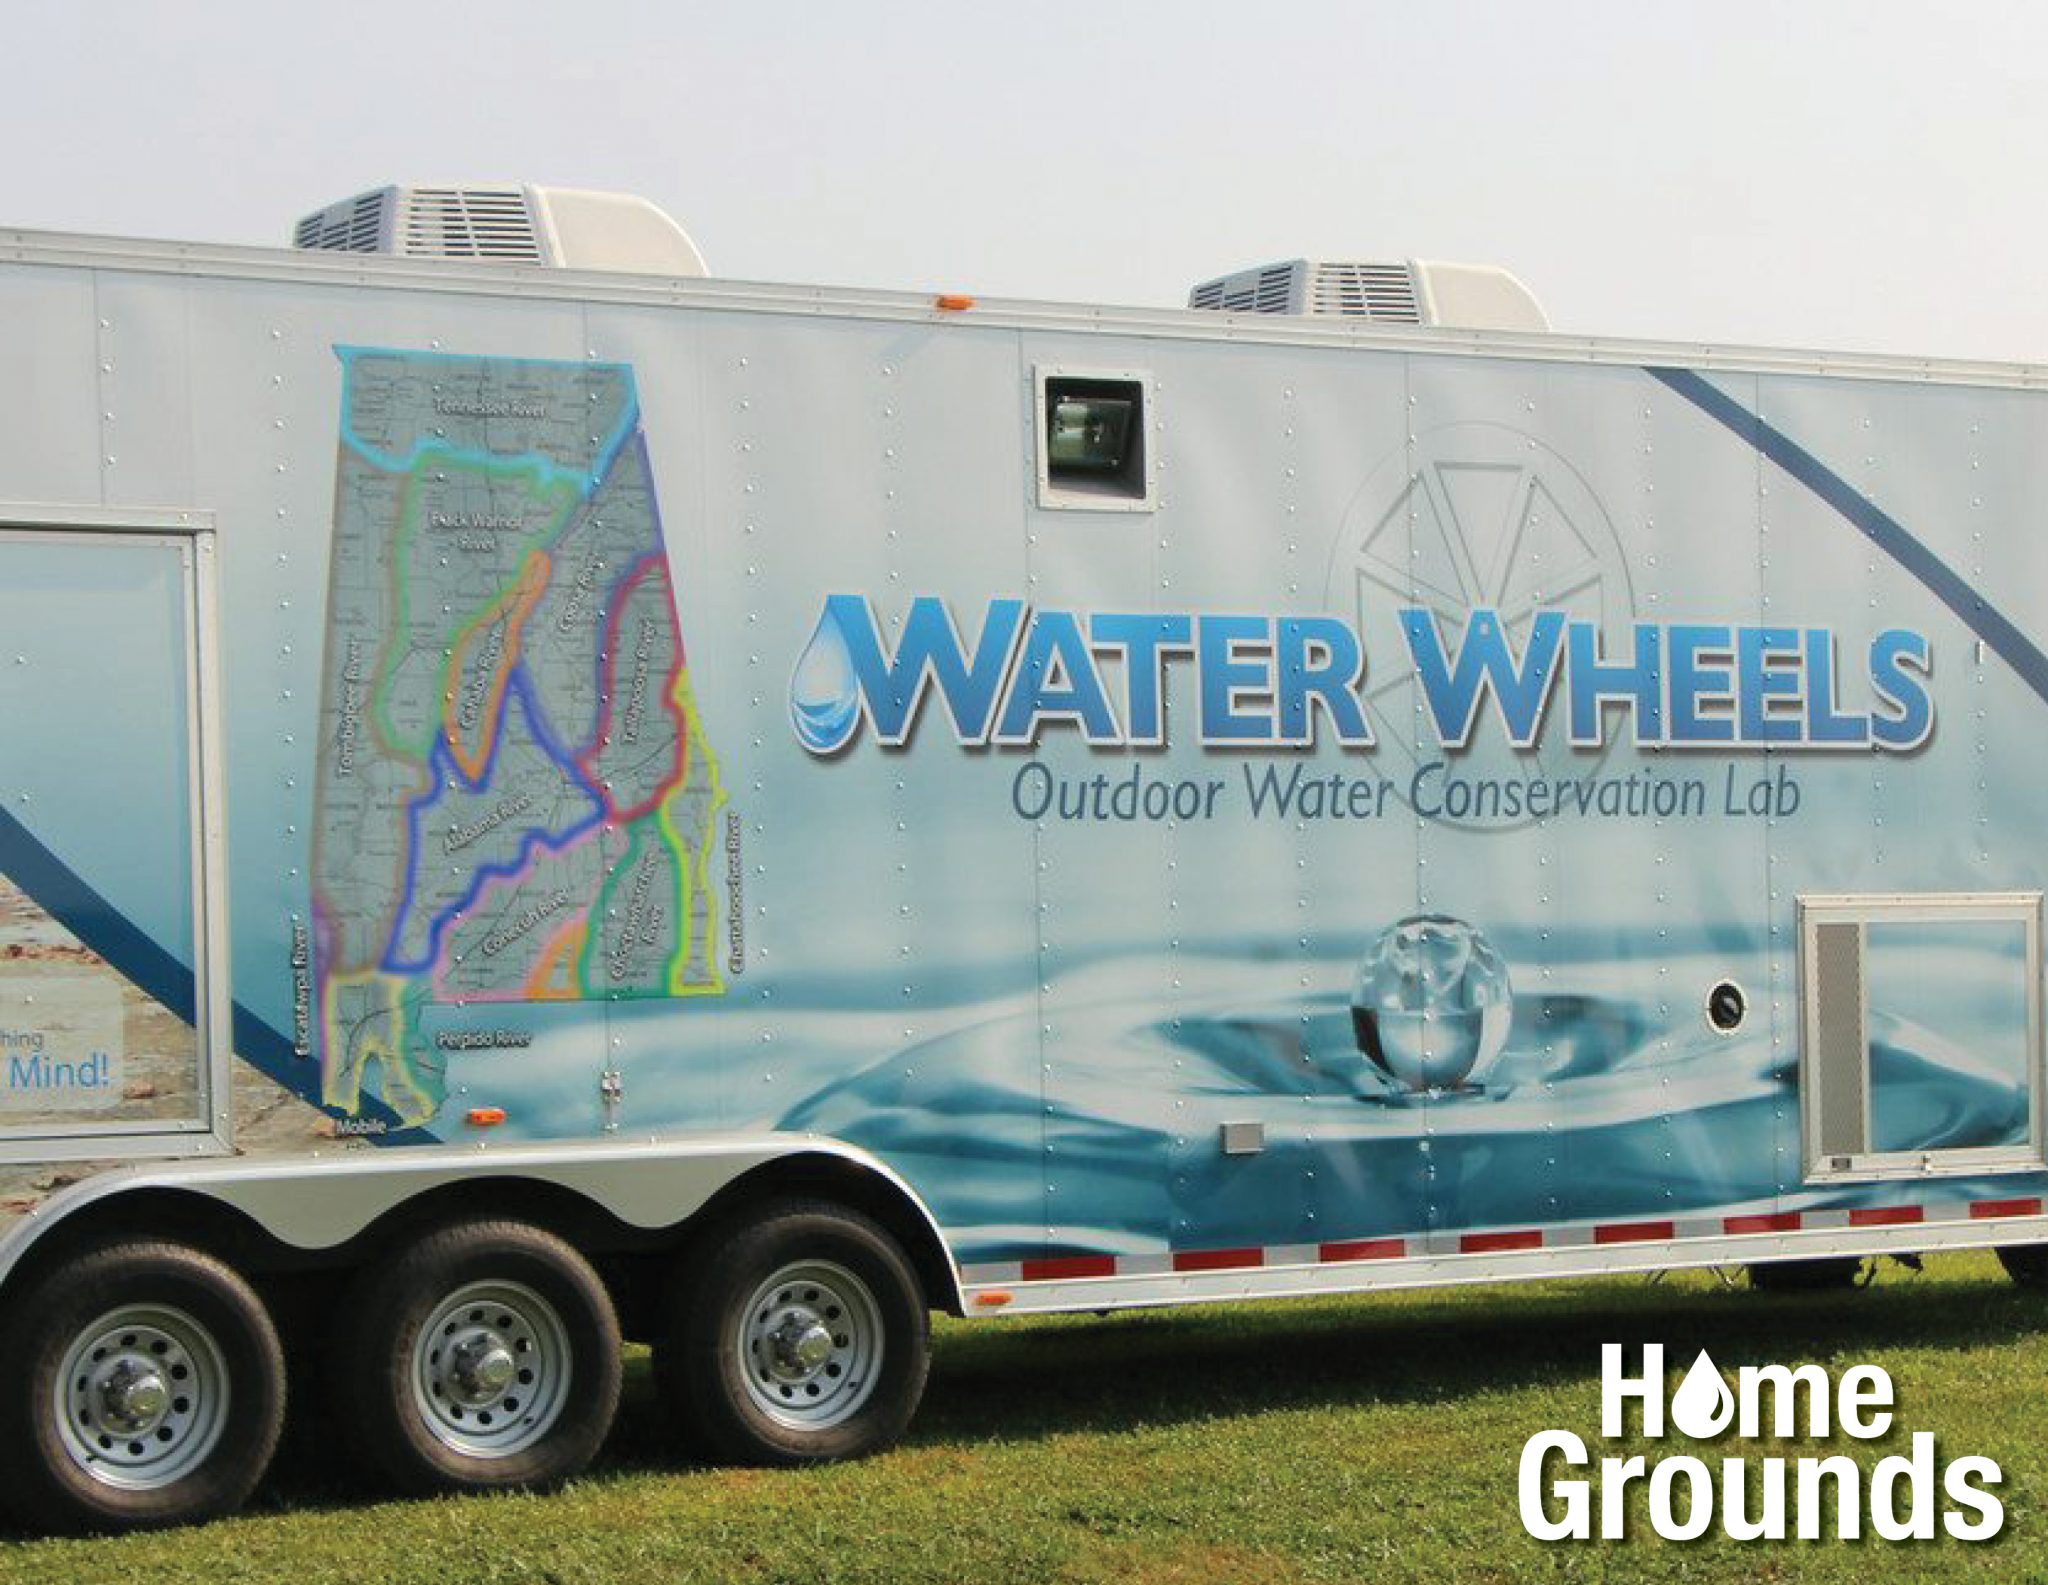 Side view of the Water Wheel Mobile Conservation Laboratory trailer.